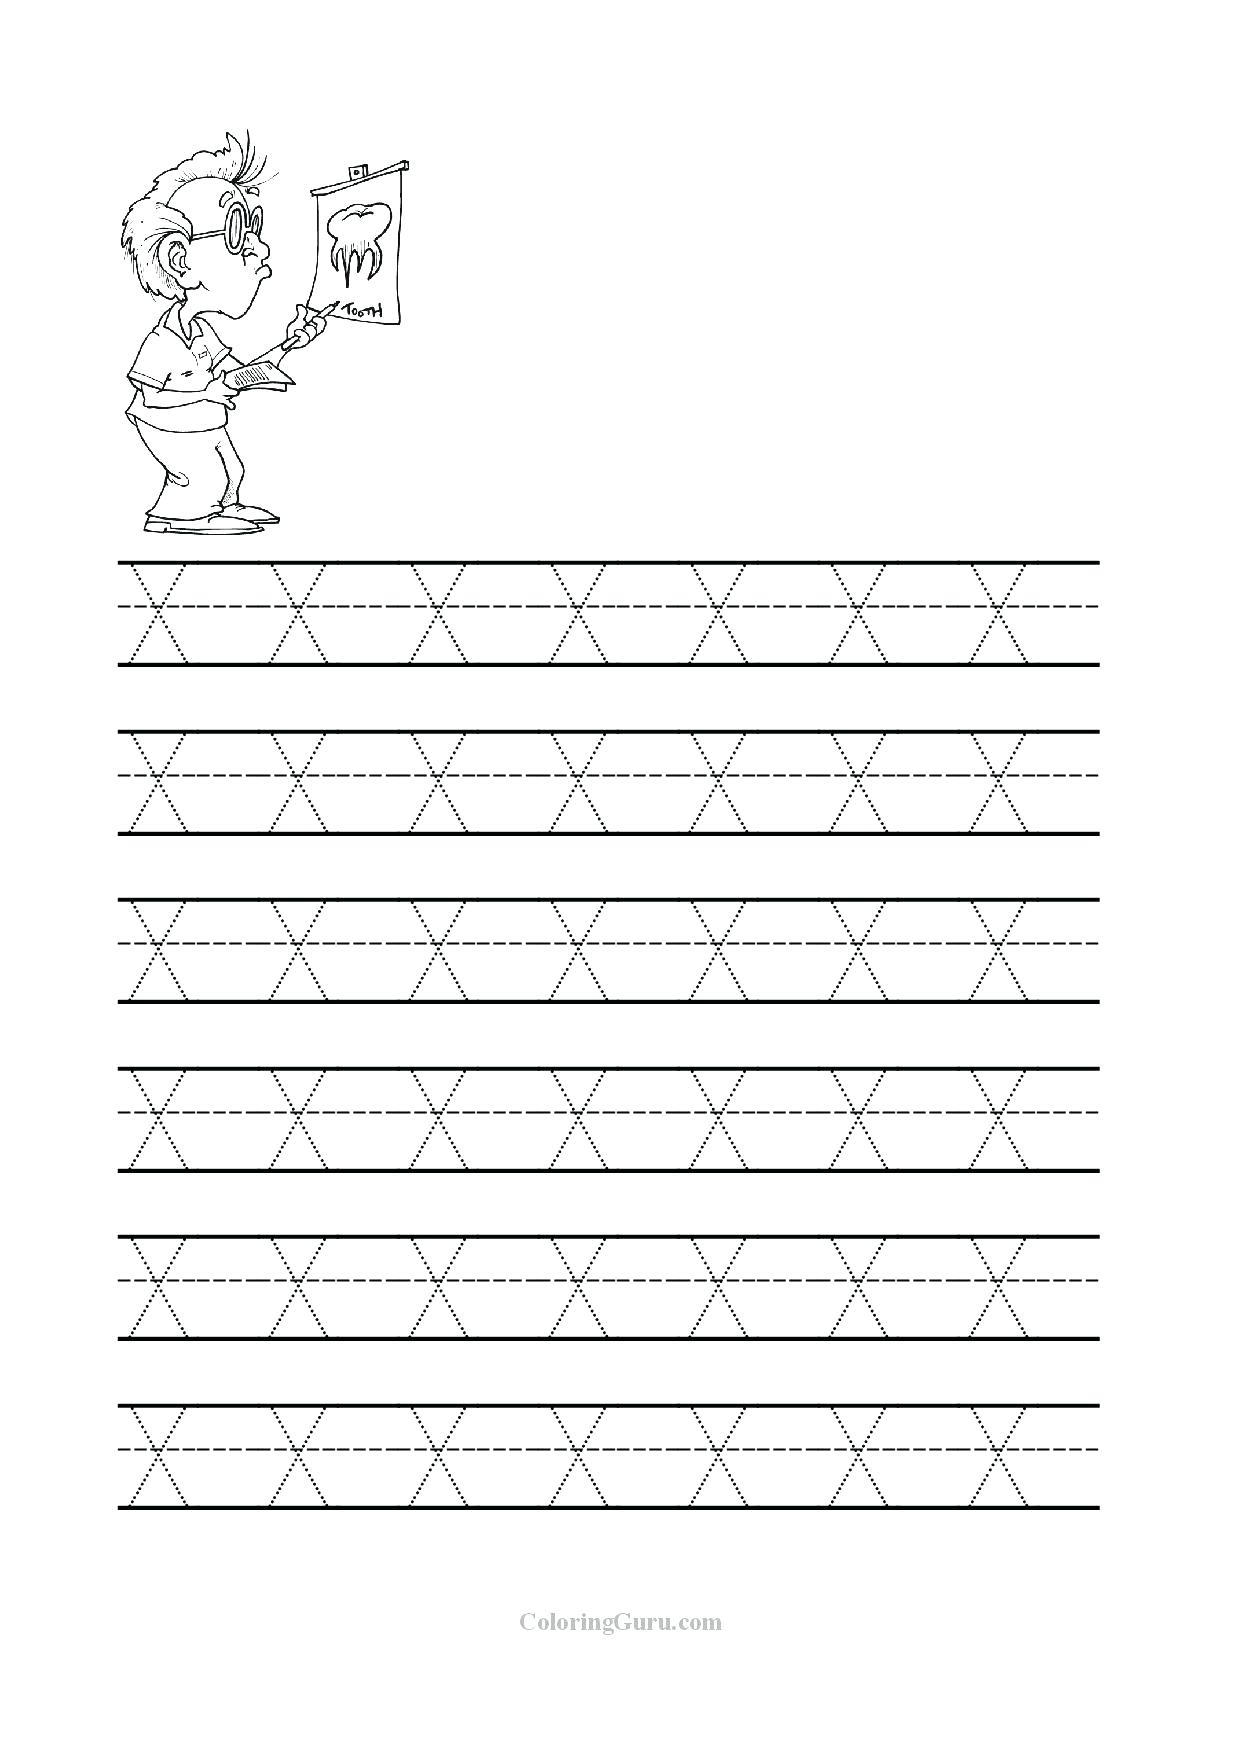 Coloring Book : Tracing Letter Worksheets Preschoolree Trace intended for Making Tracing Letters Worksheets